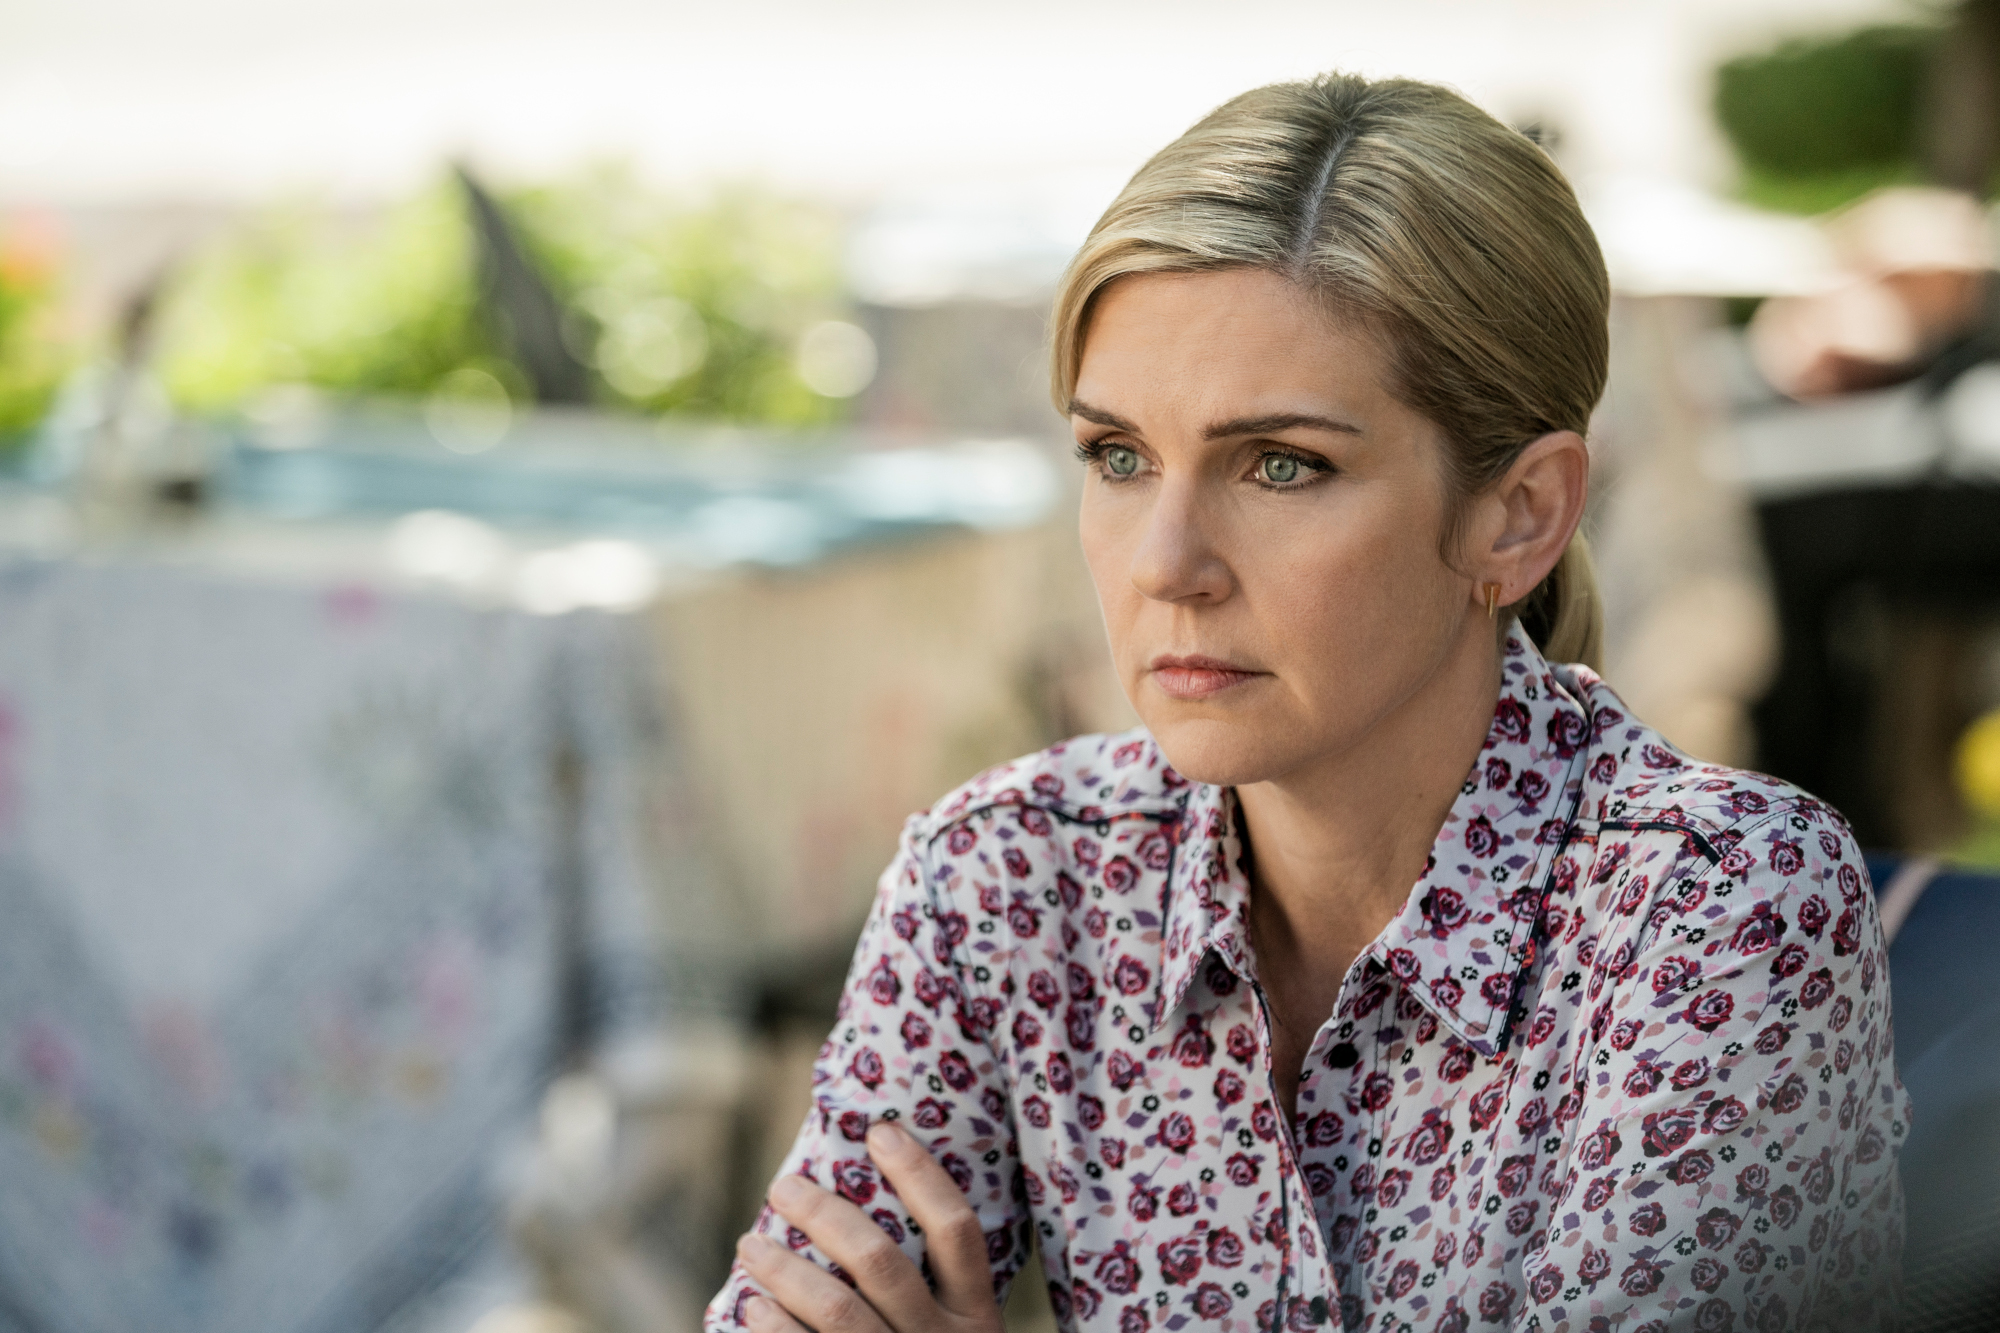 Rhea Seehorn as Kim Wexler in 'Better Call Saul' Season 6, which will air its part 2 in July. She's wearing a floral shirt, her hair is in a ponytail, and she's leaning onto a table.